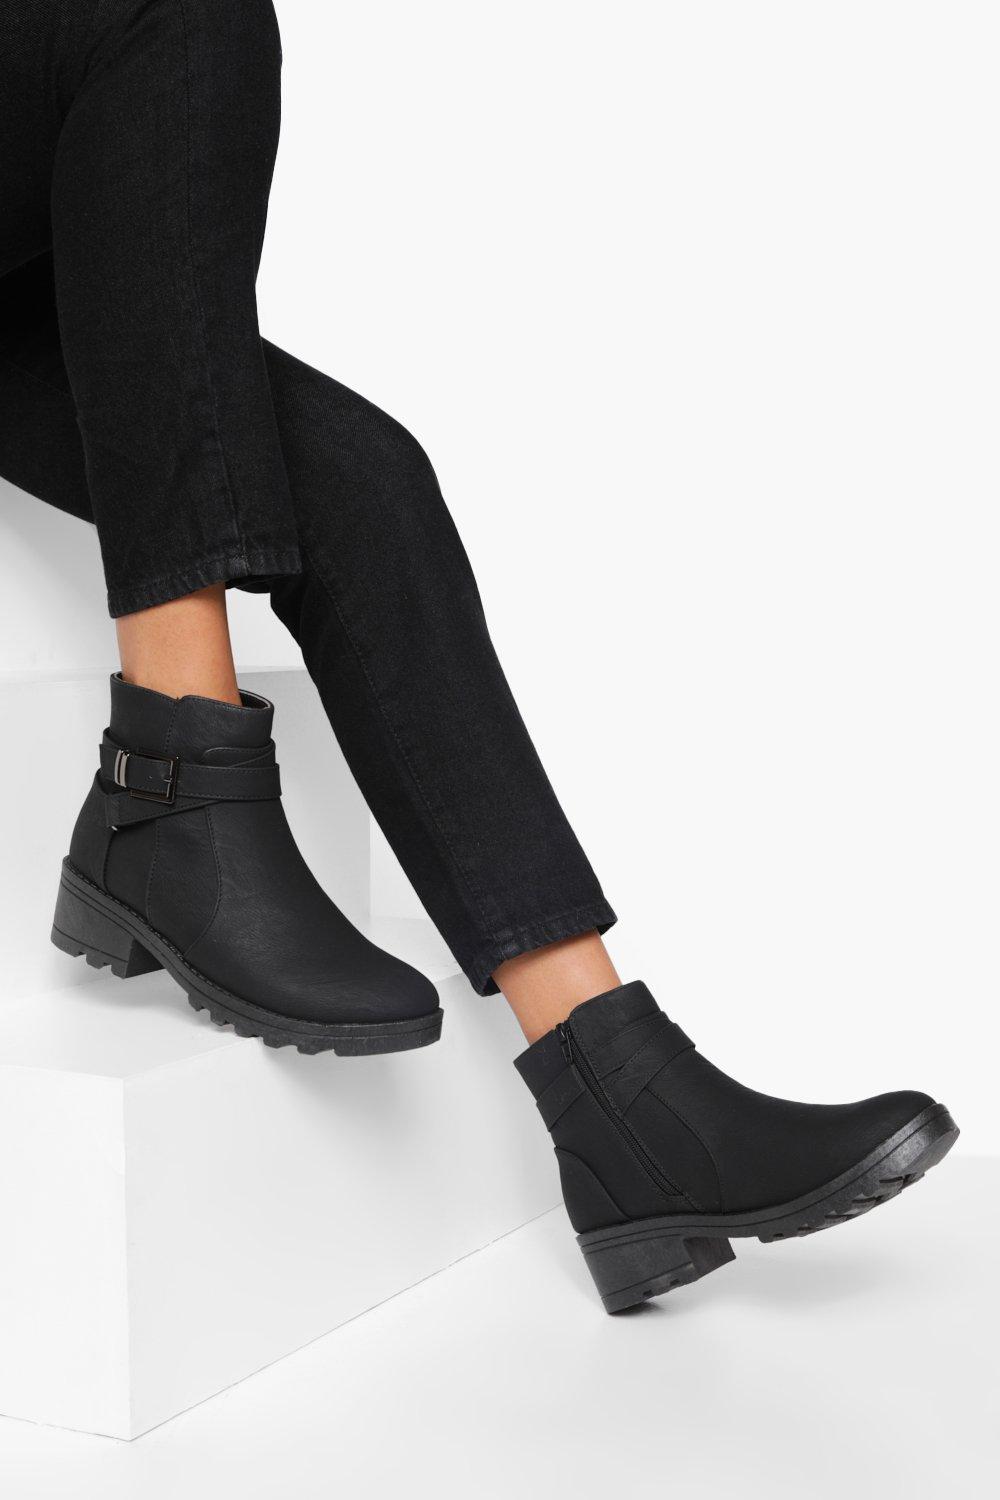 Boohoo Double Buckle Chelsea Ankle Boots